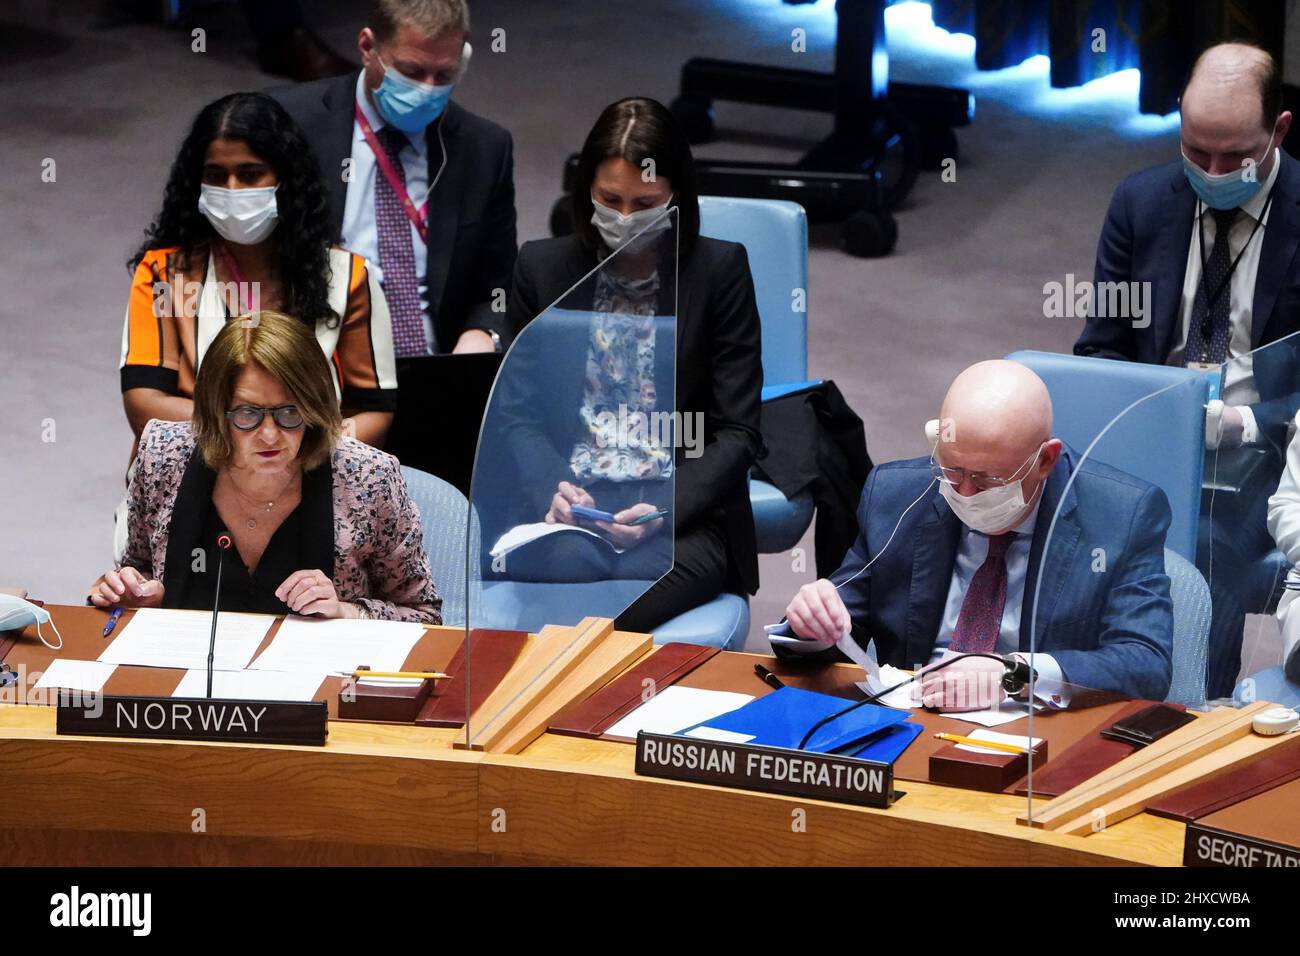 Norway's Ambassador to the U.N. Mona Juul speaks as she sits next to Russia's Ambassador to the U.N. Vasily Nebenzya during the United Nations Security Council meeting on Threats to International Peace and Security, following Russia's invasion of Ukraine, in New York City, U.S. March 11, 2022. REUTERS/Carlo Allegri Stock Photo